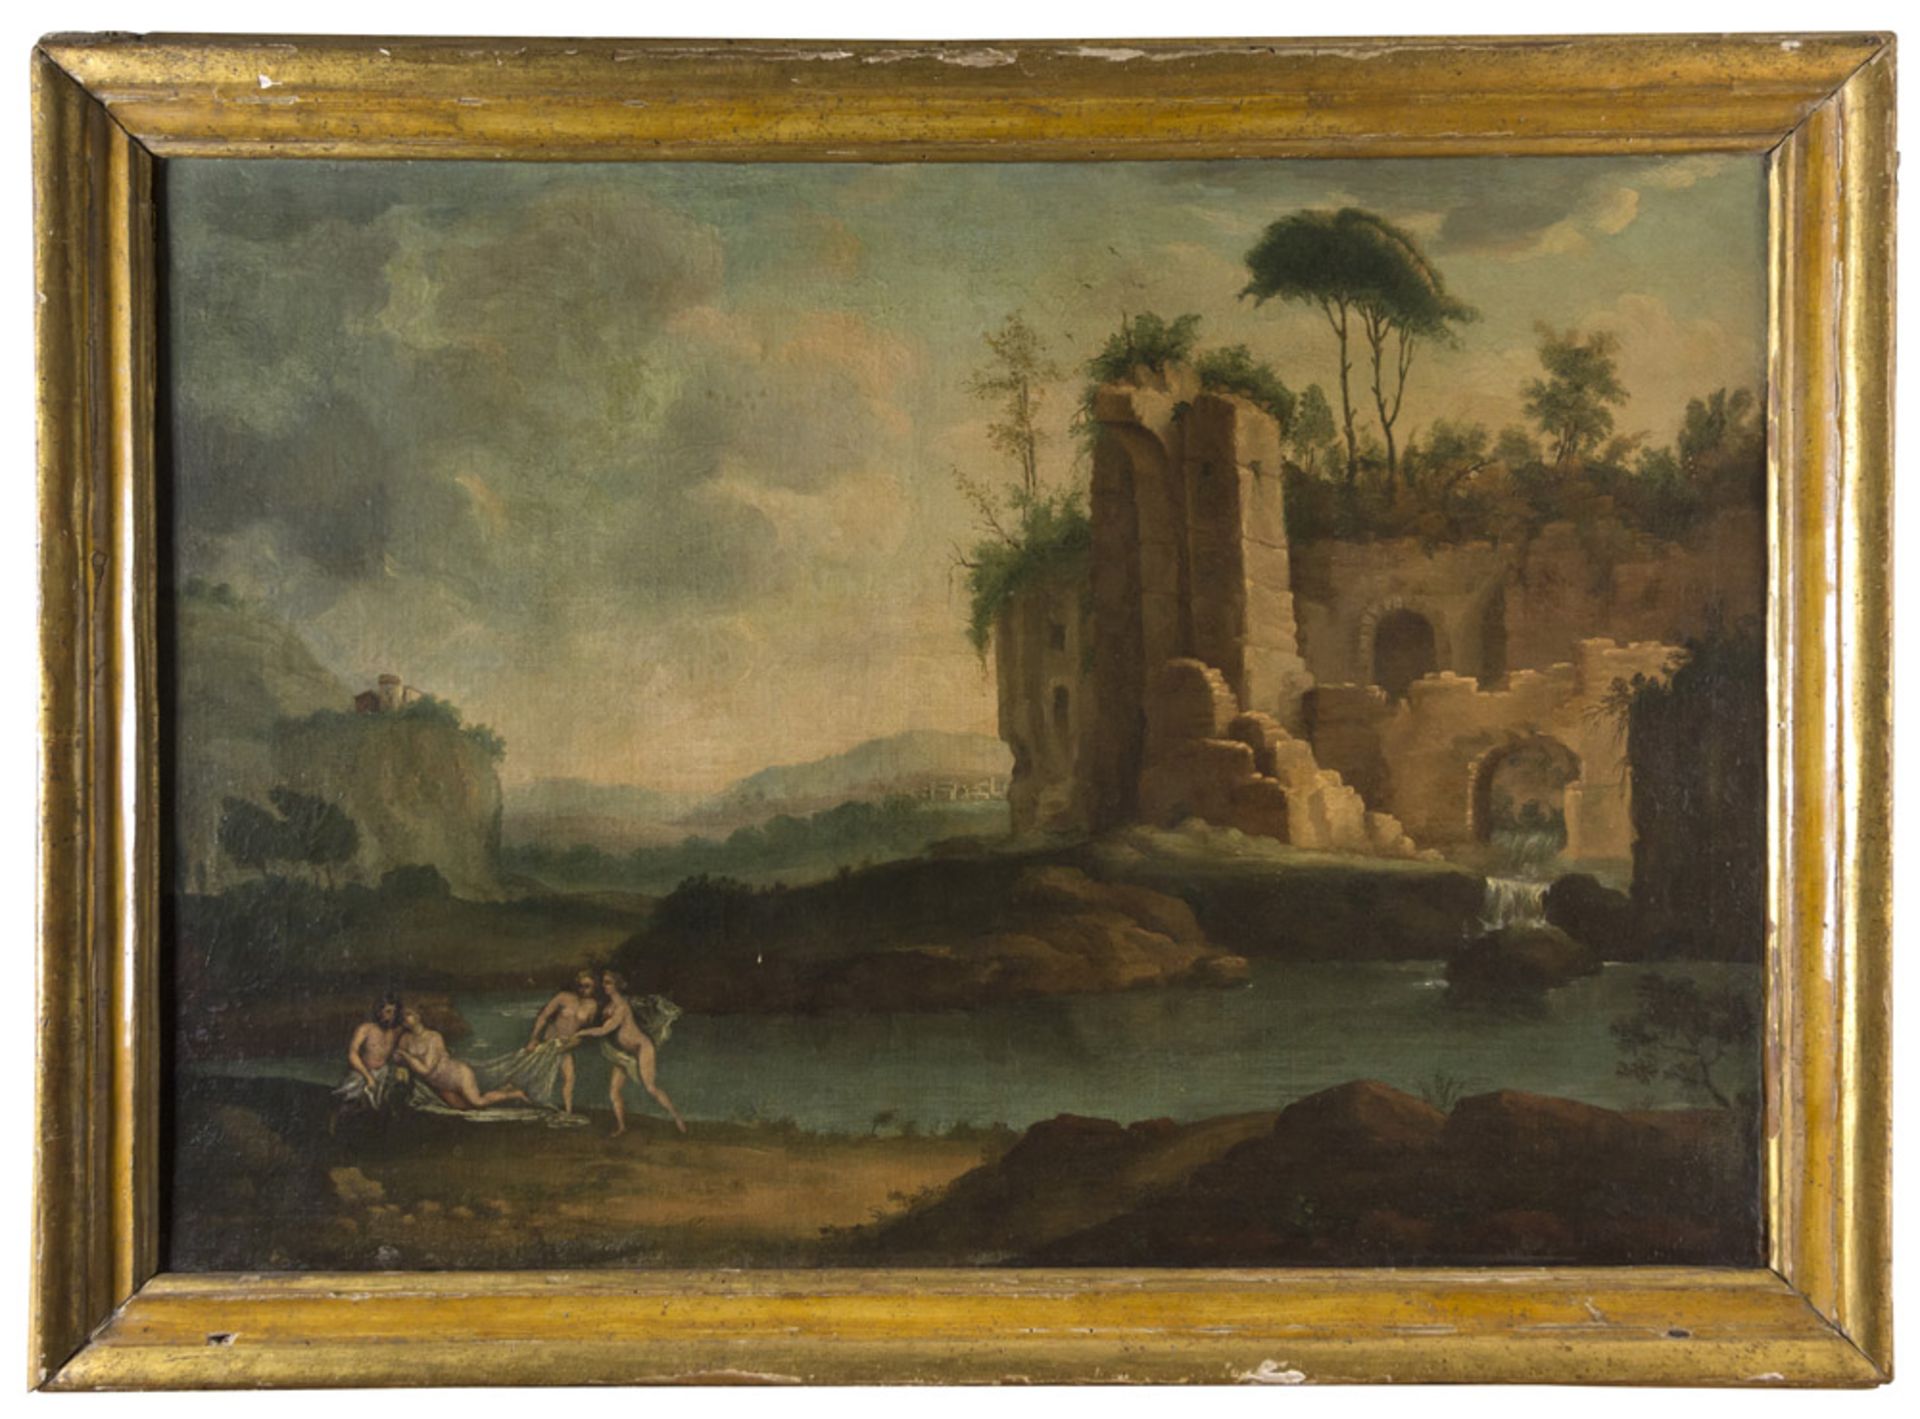 NICOLA VISO, follower of (Active in Naples 18th century) LANDSCAPE WITH ROVINE AND BAGNANTI Oil on